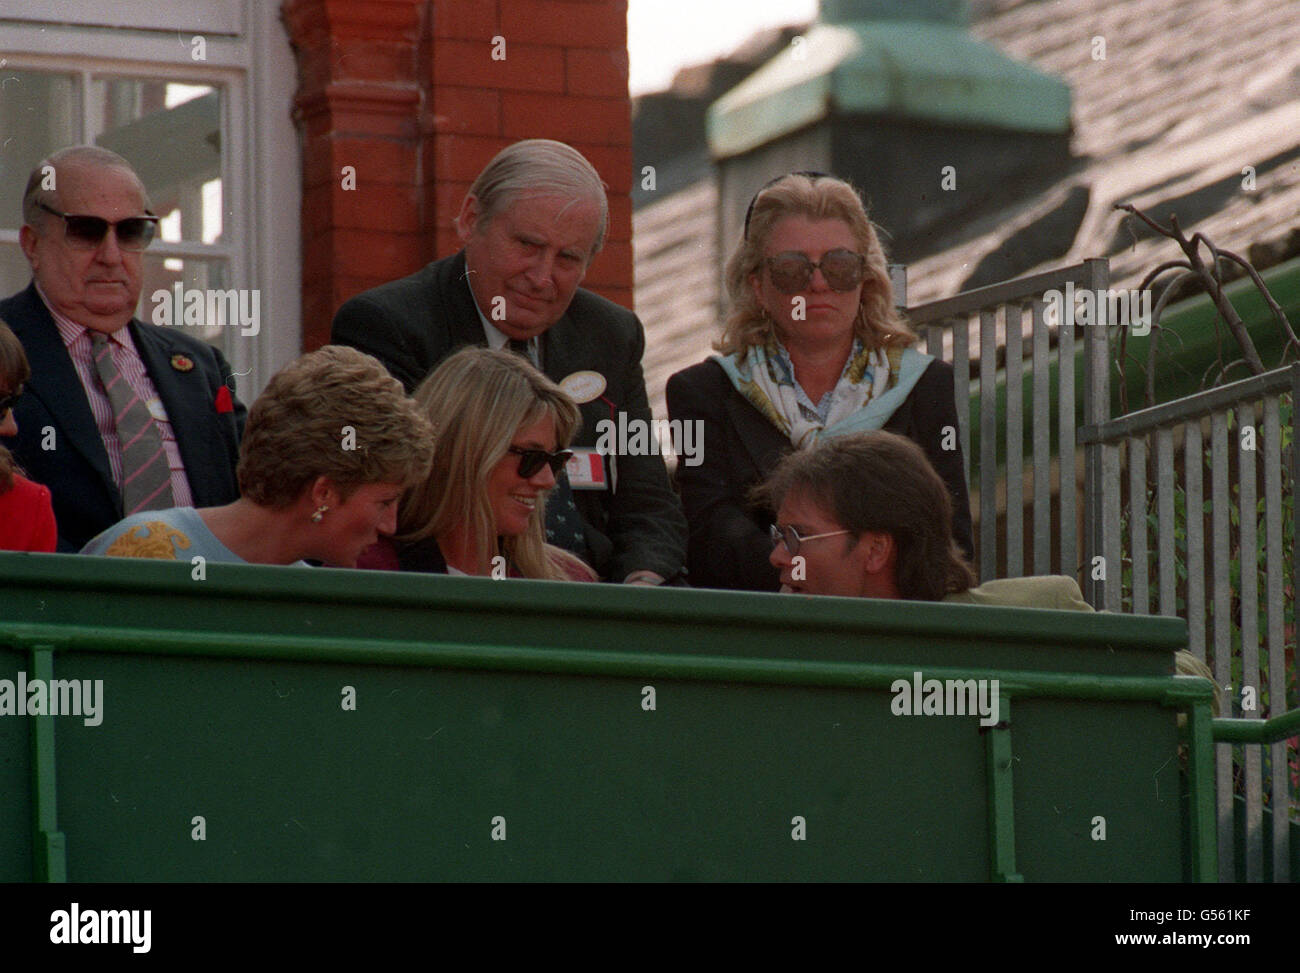 1993: The Princess of Wales (left) chats to pop singer Cliff Richard during the Stelle Artois Championships at Queen's Club. With them is a friend of the Princess, Kate Menzies. Stock Photo